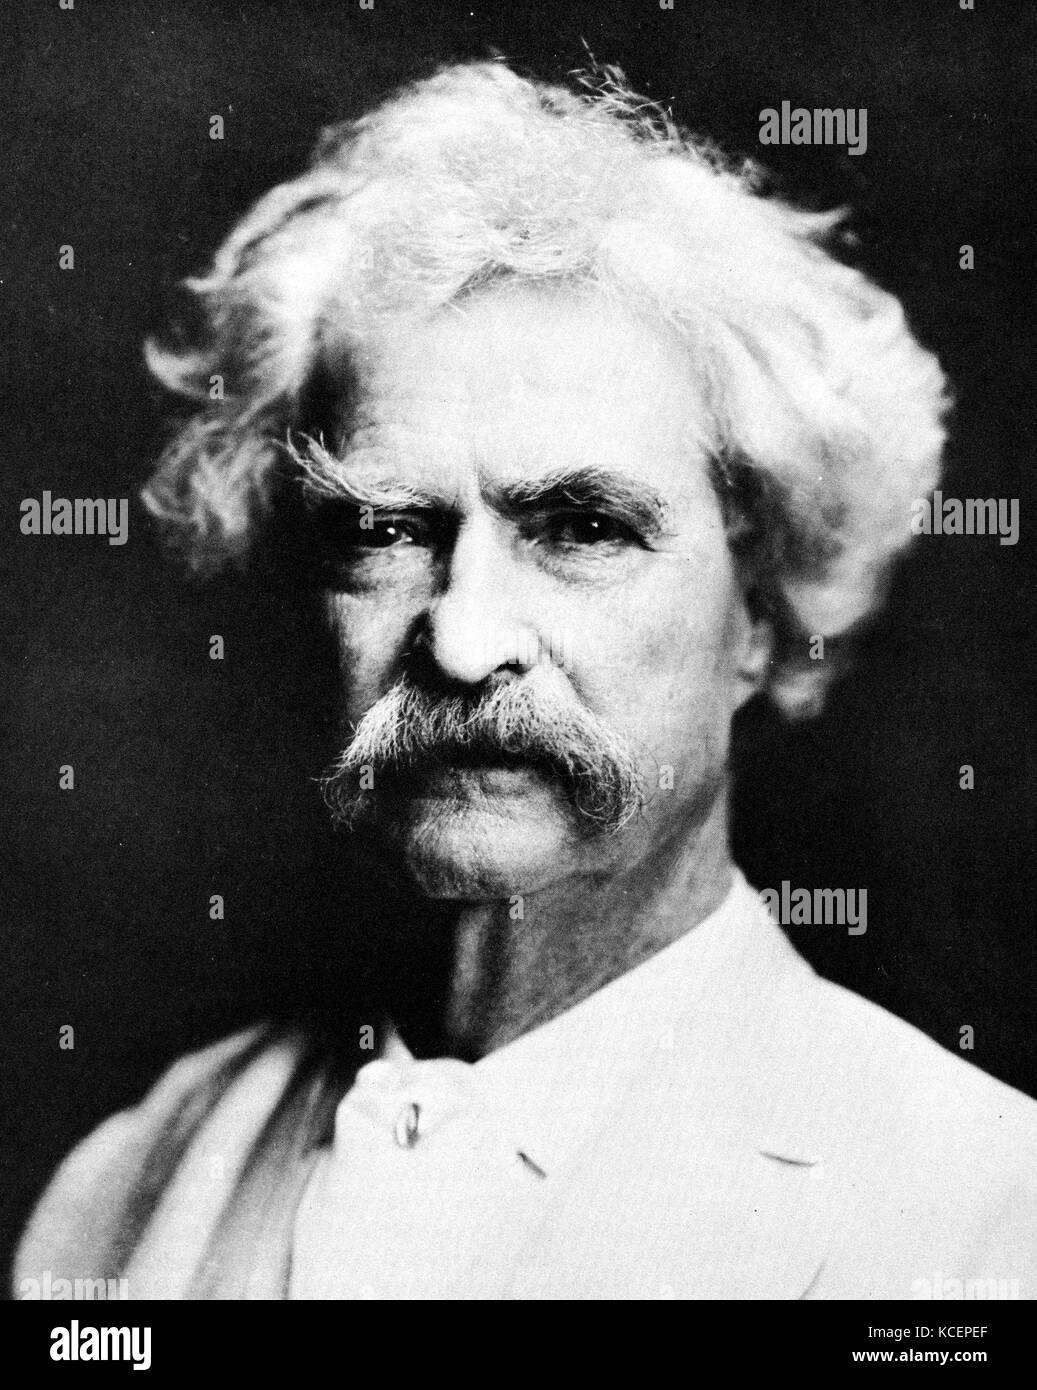 Photograph of Mark Twain (1835-1910) an American writer humourist, entrepreneur, publisher, and lecturer. Dated 19th Century Stock Photo